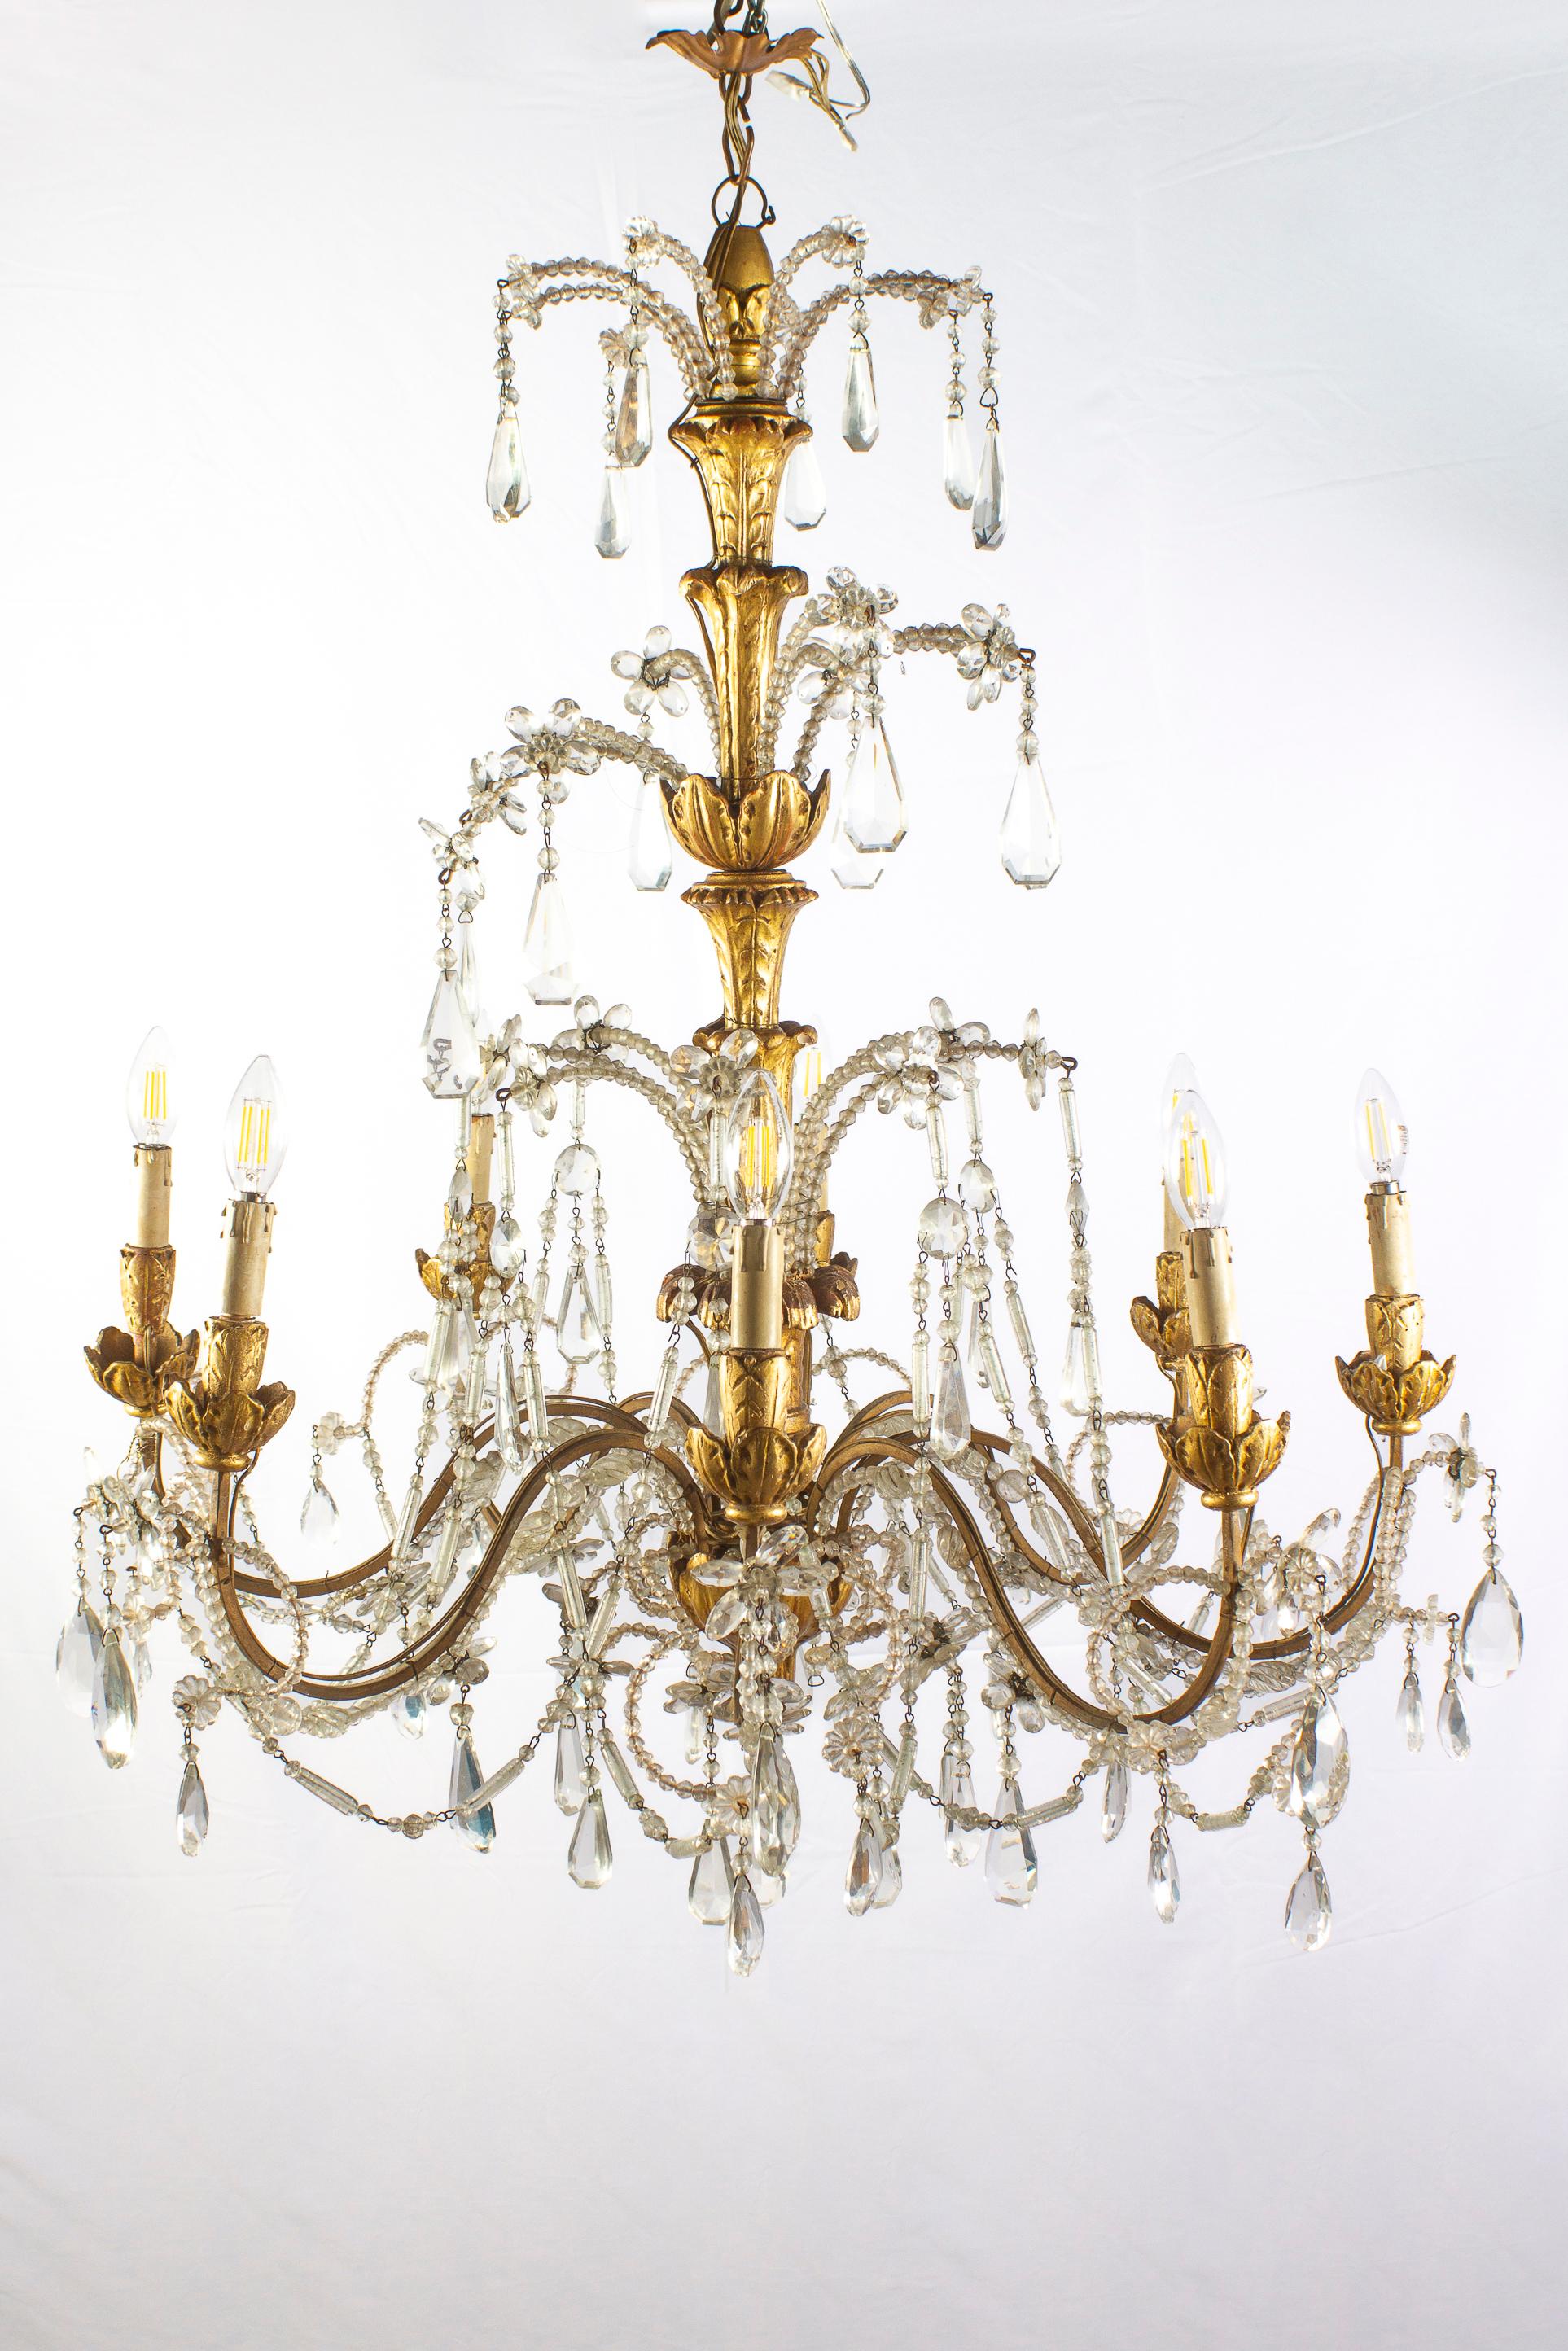 Louis XVI Pair of Italian Giltwood and Crystal Chandelier 18th Century Great Beauty For Sale